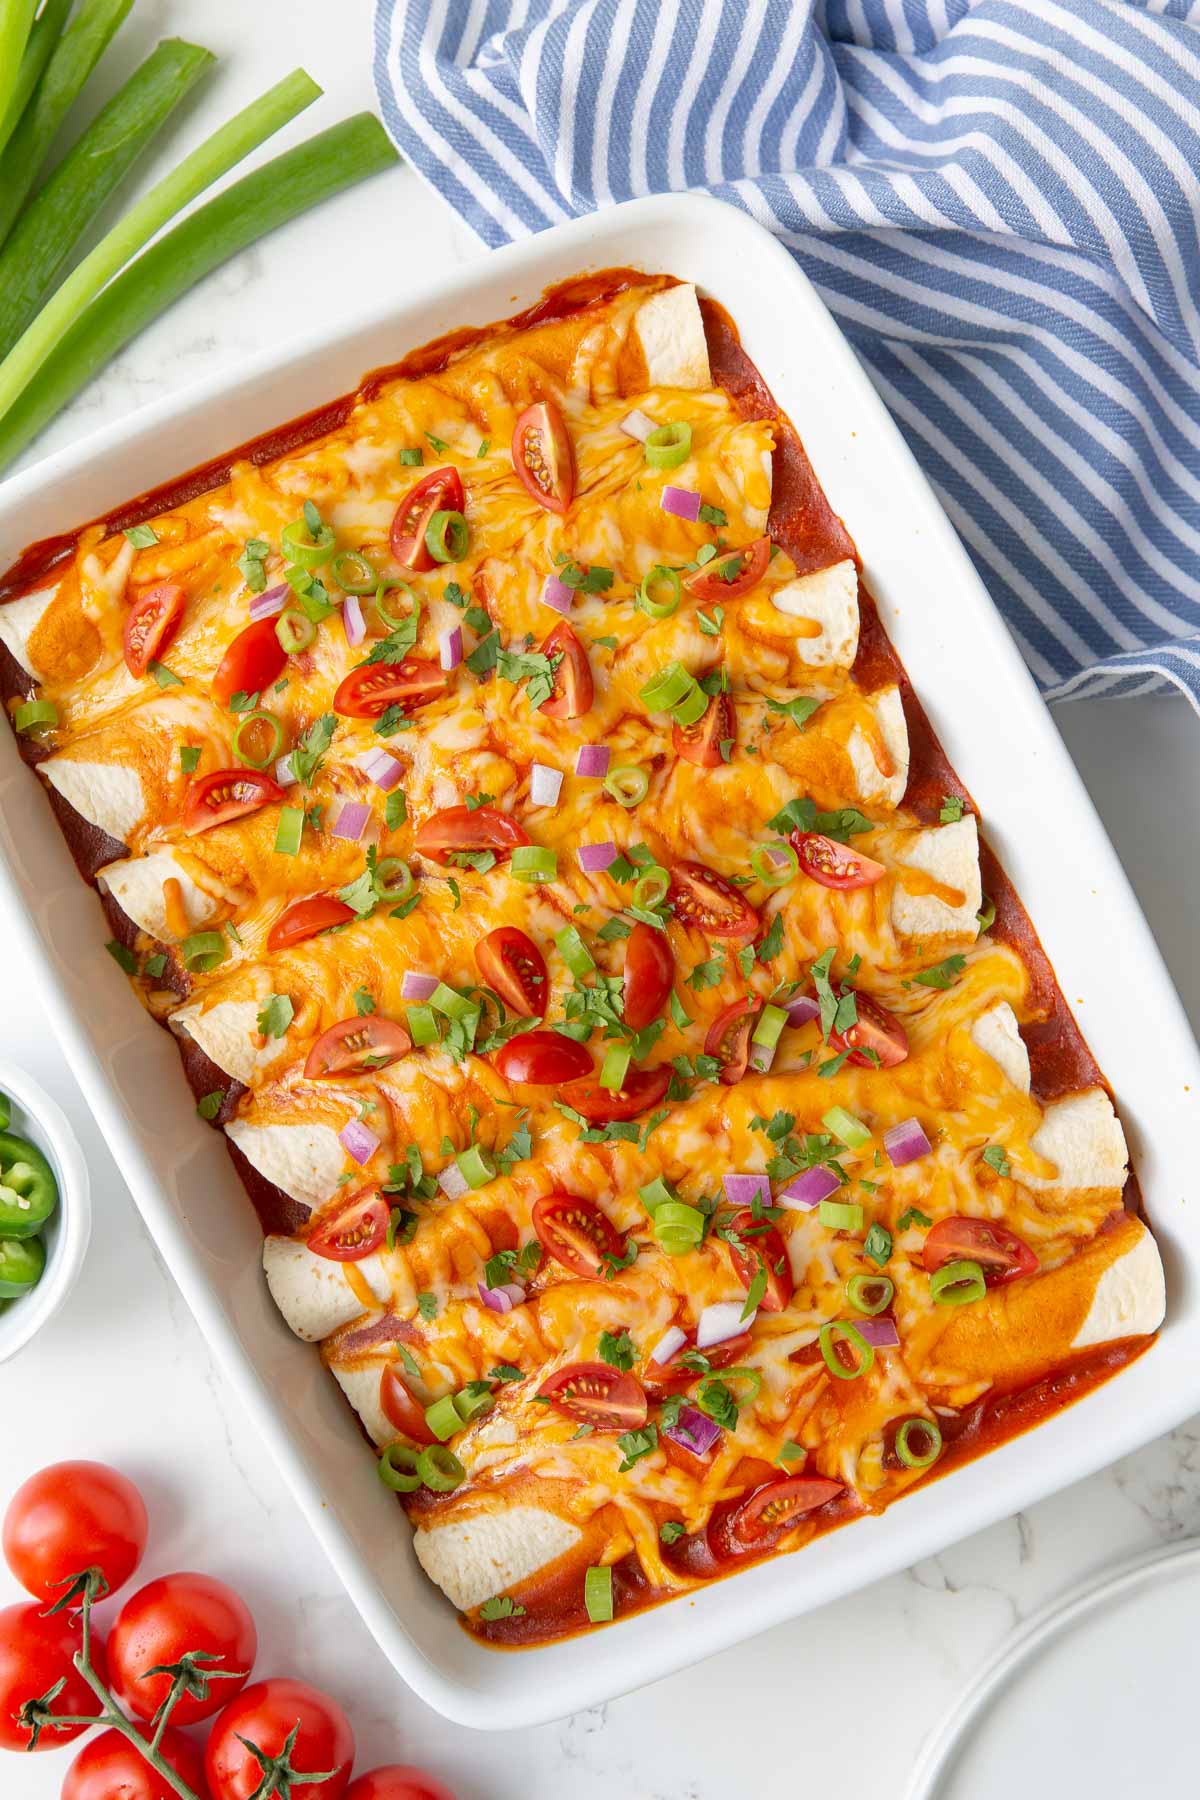 Overhead view of shredded beef enchiladas in a white baking dish.